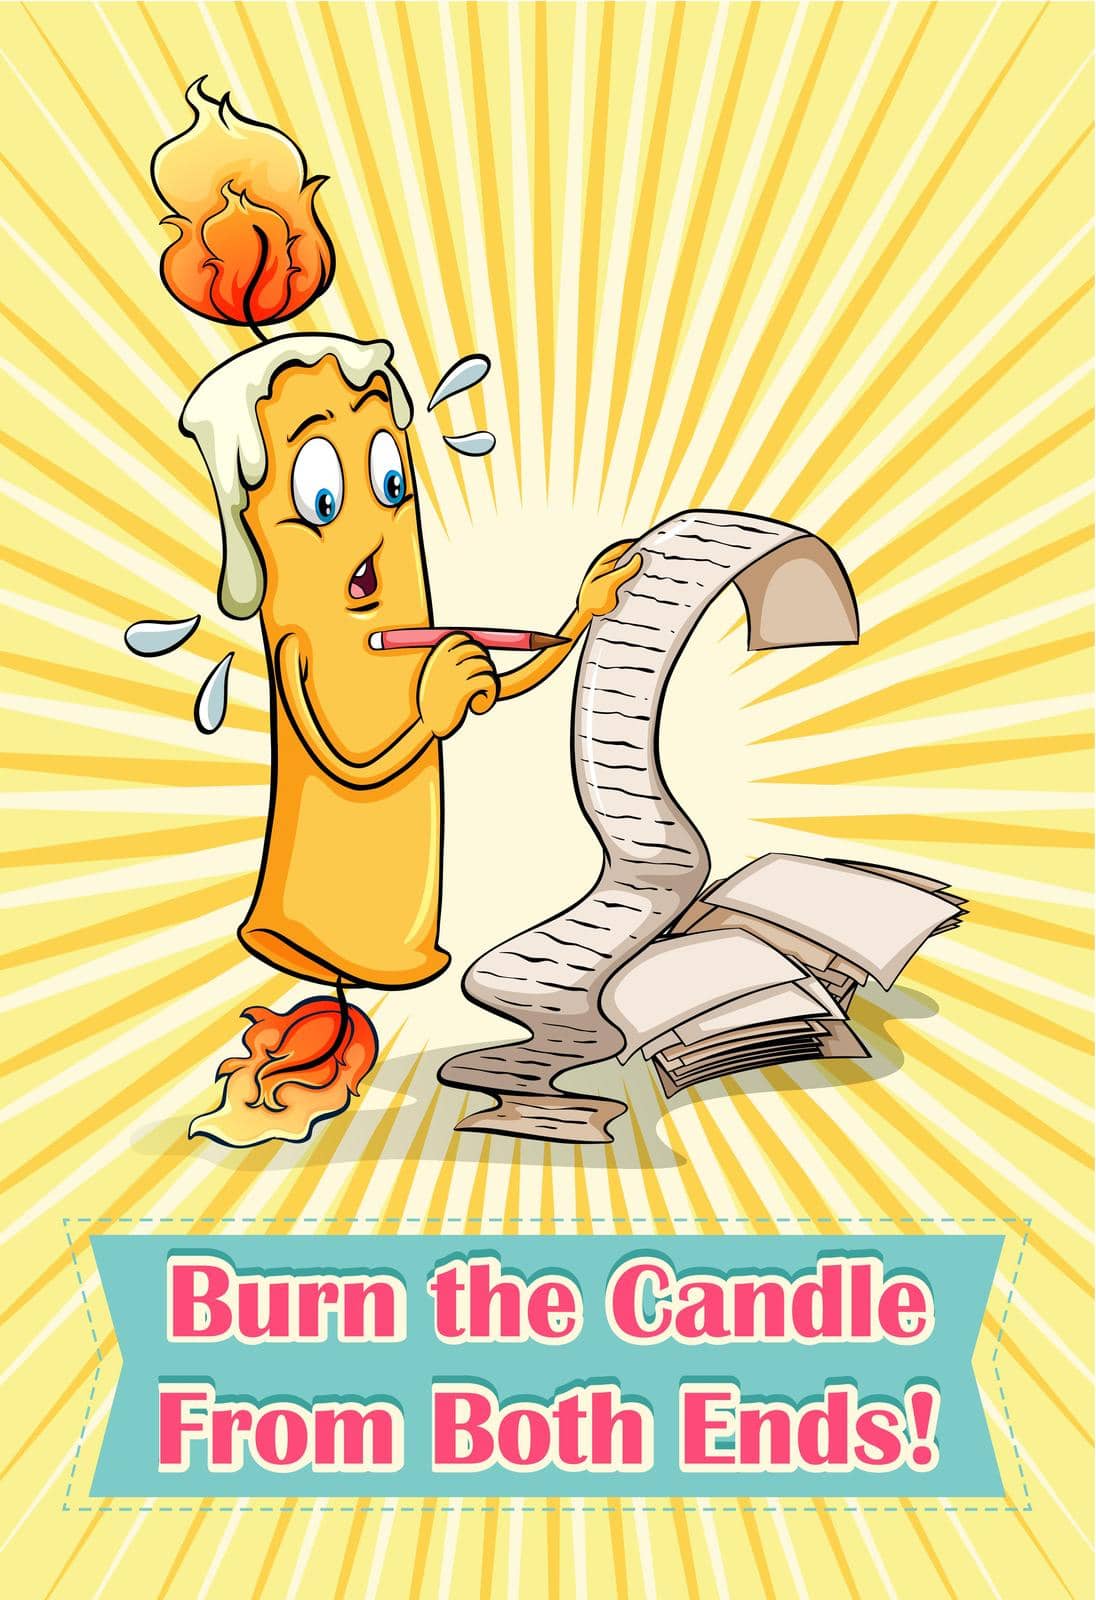 Burn the candle from both ends by iimages